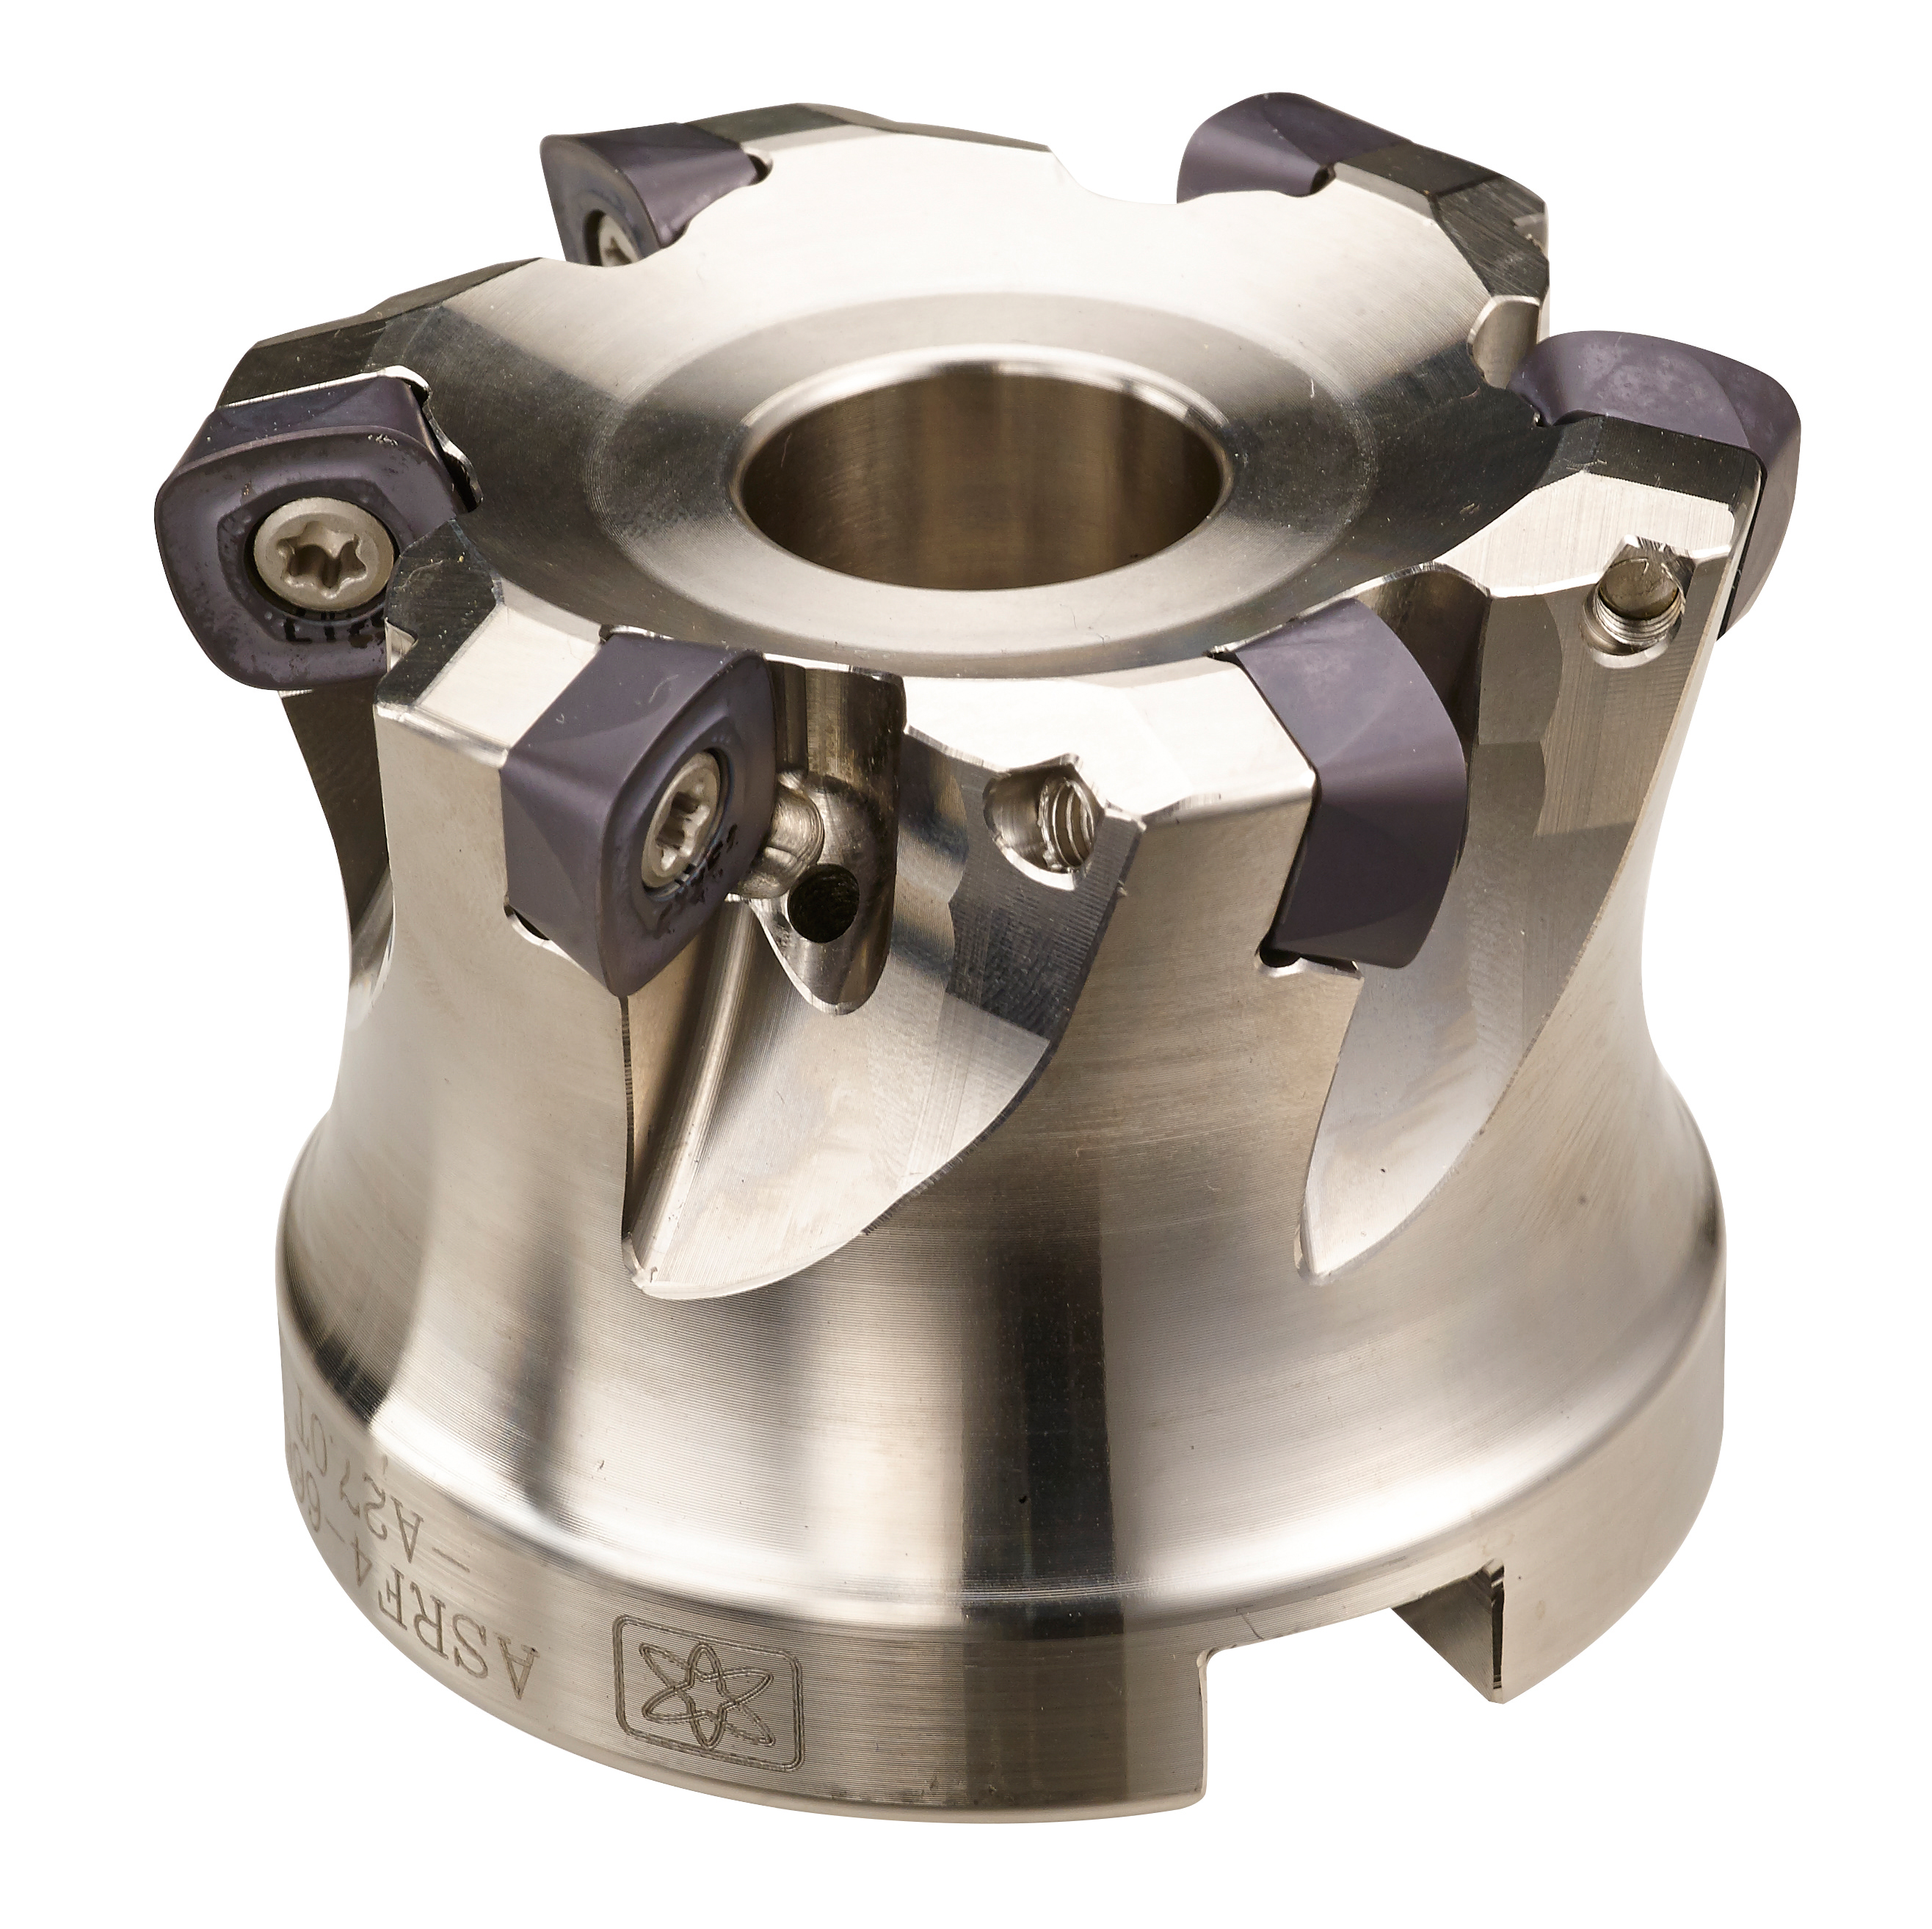 ASRF4 （SD..1205ZDTN）High Feed Milling